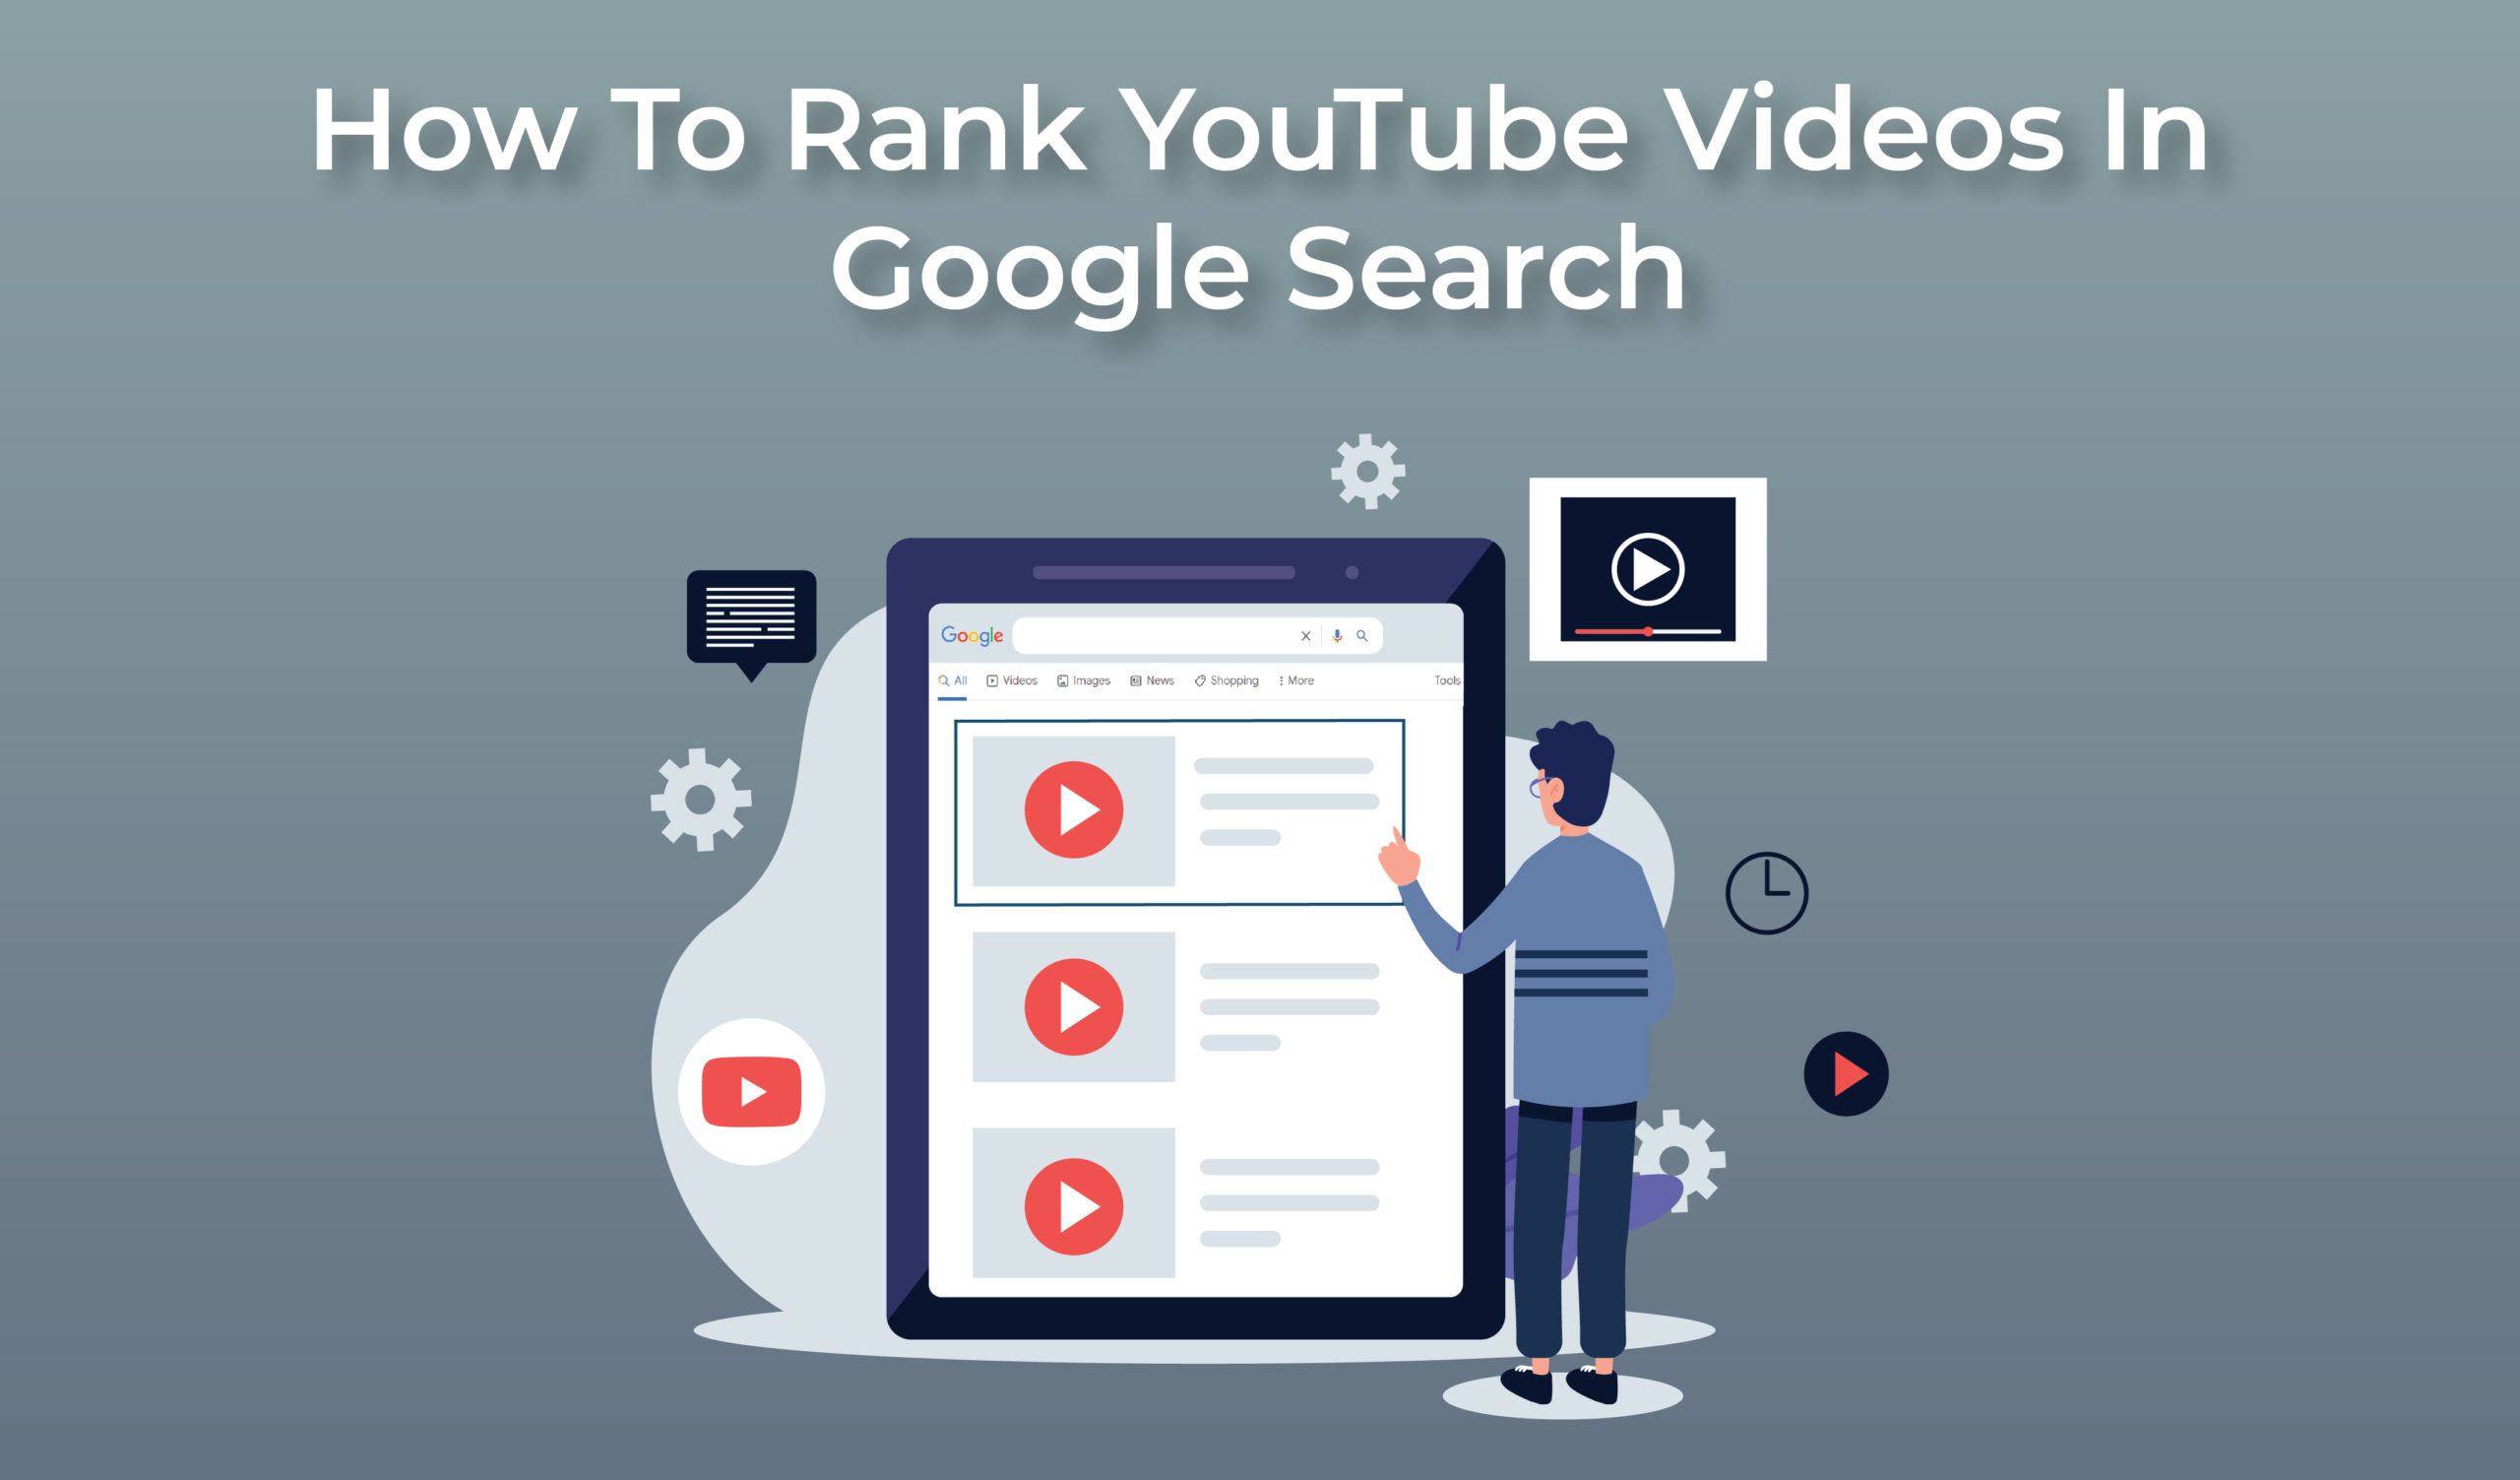 How to rank YouTube videos in Google search?